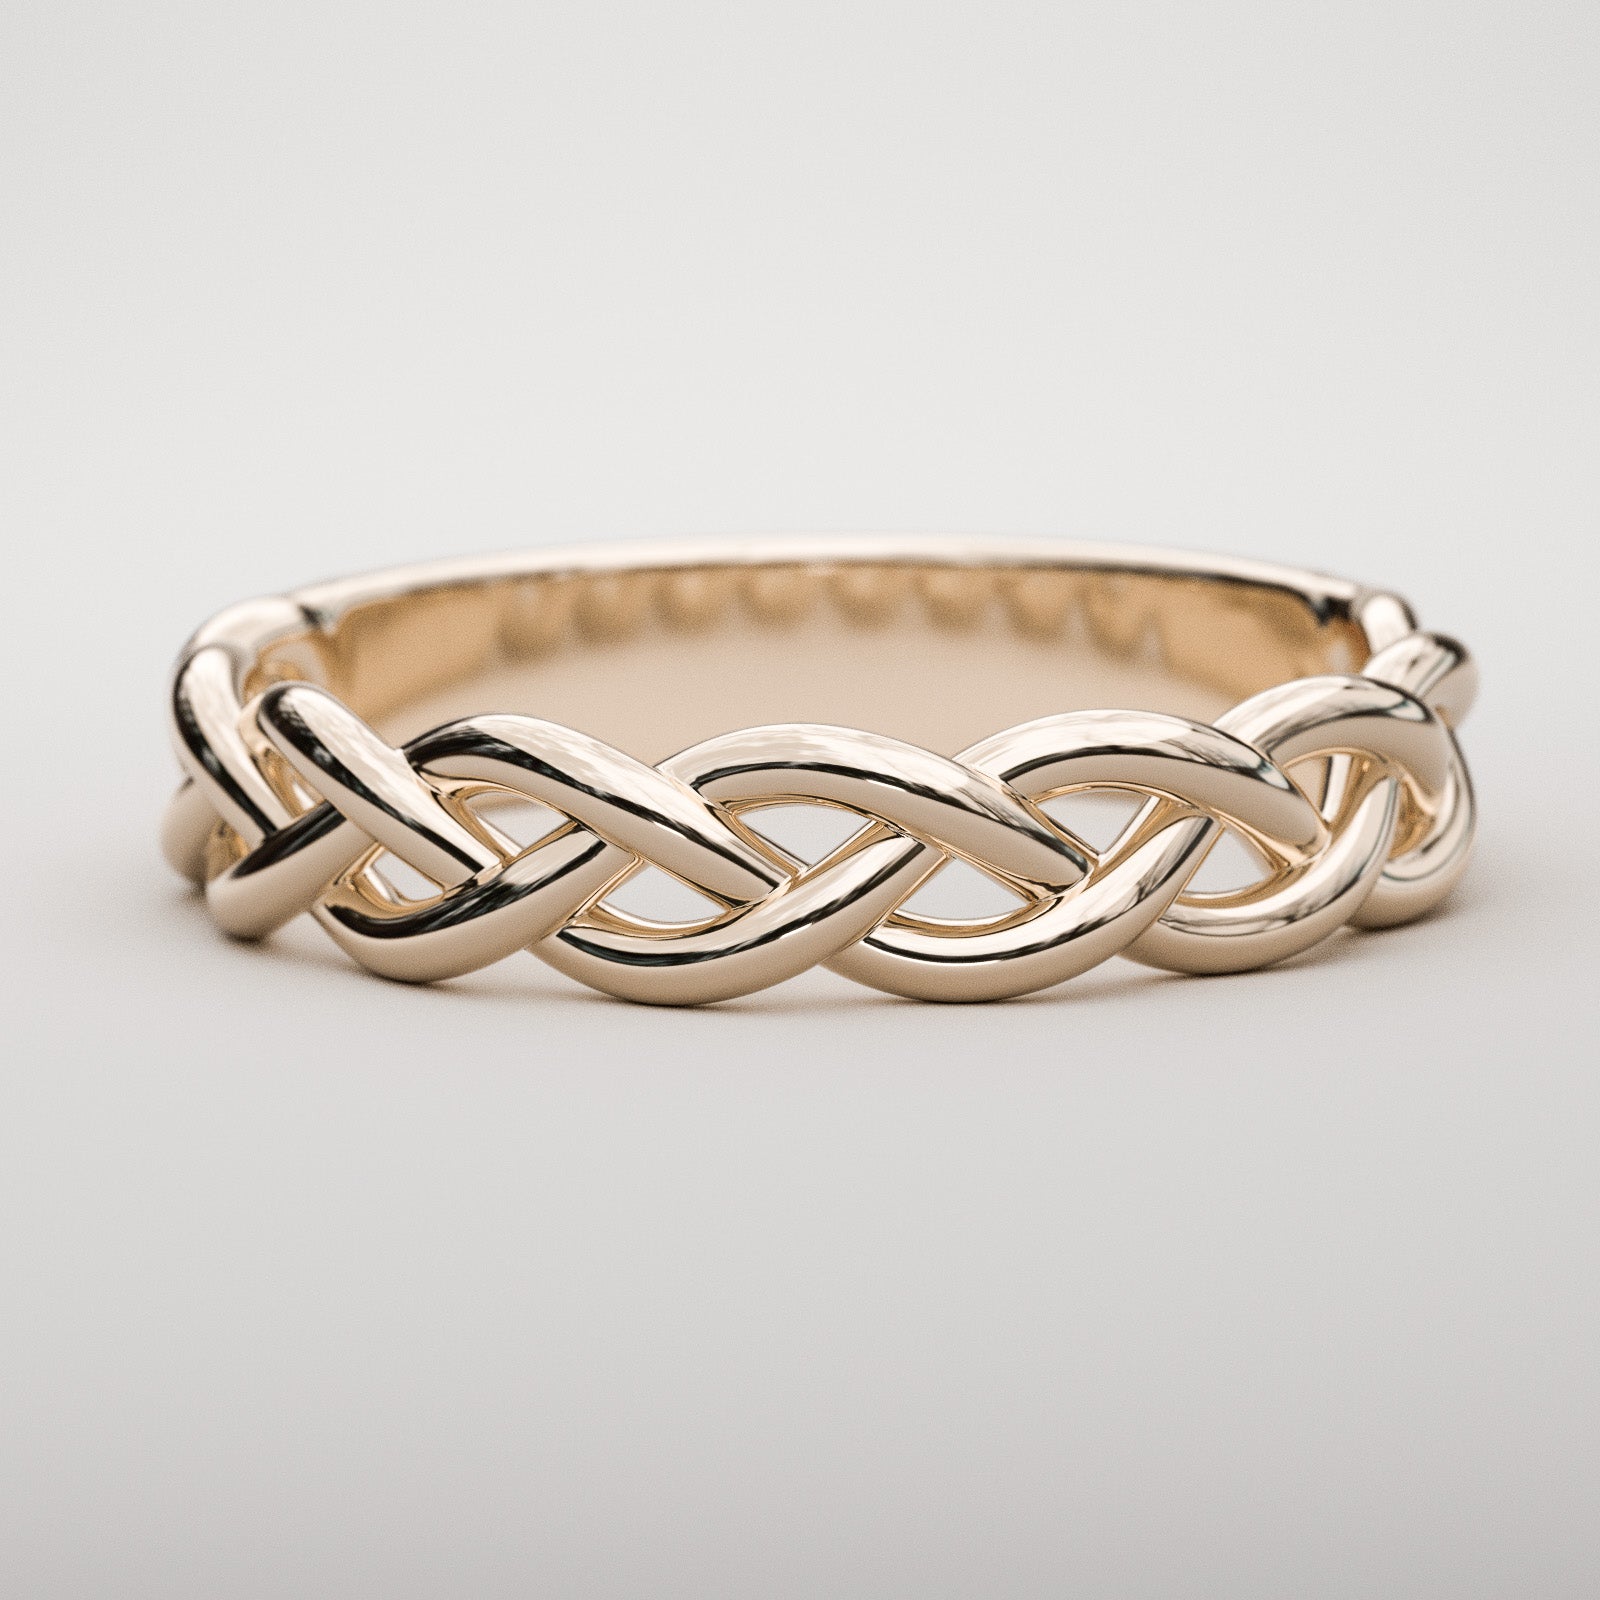 Braided rose gold band